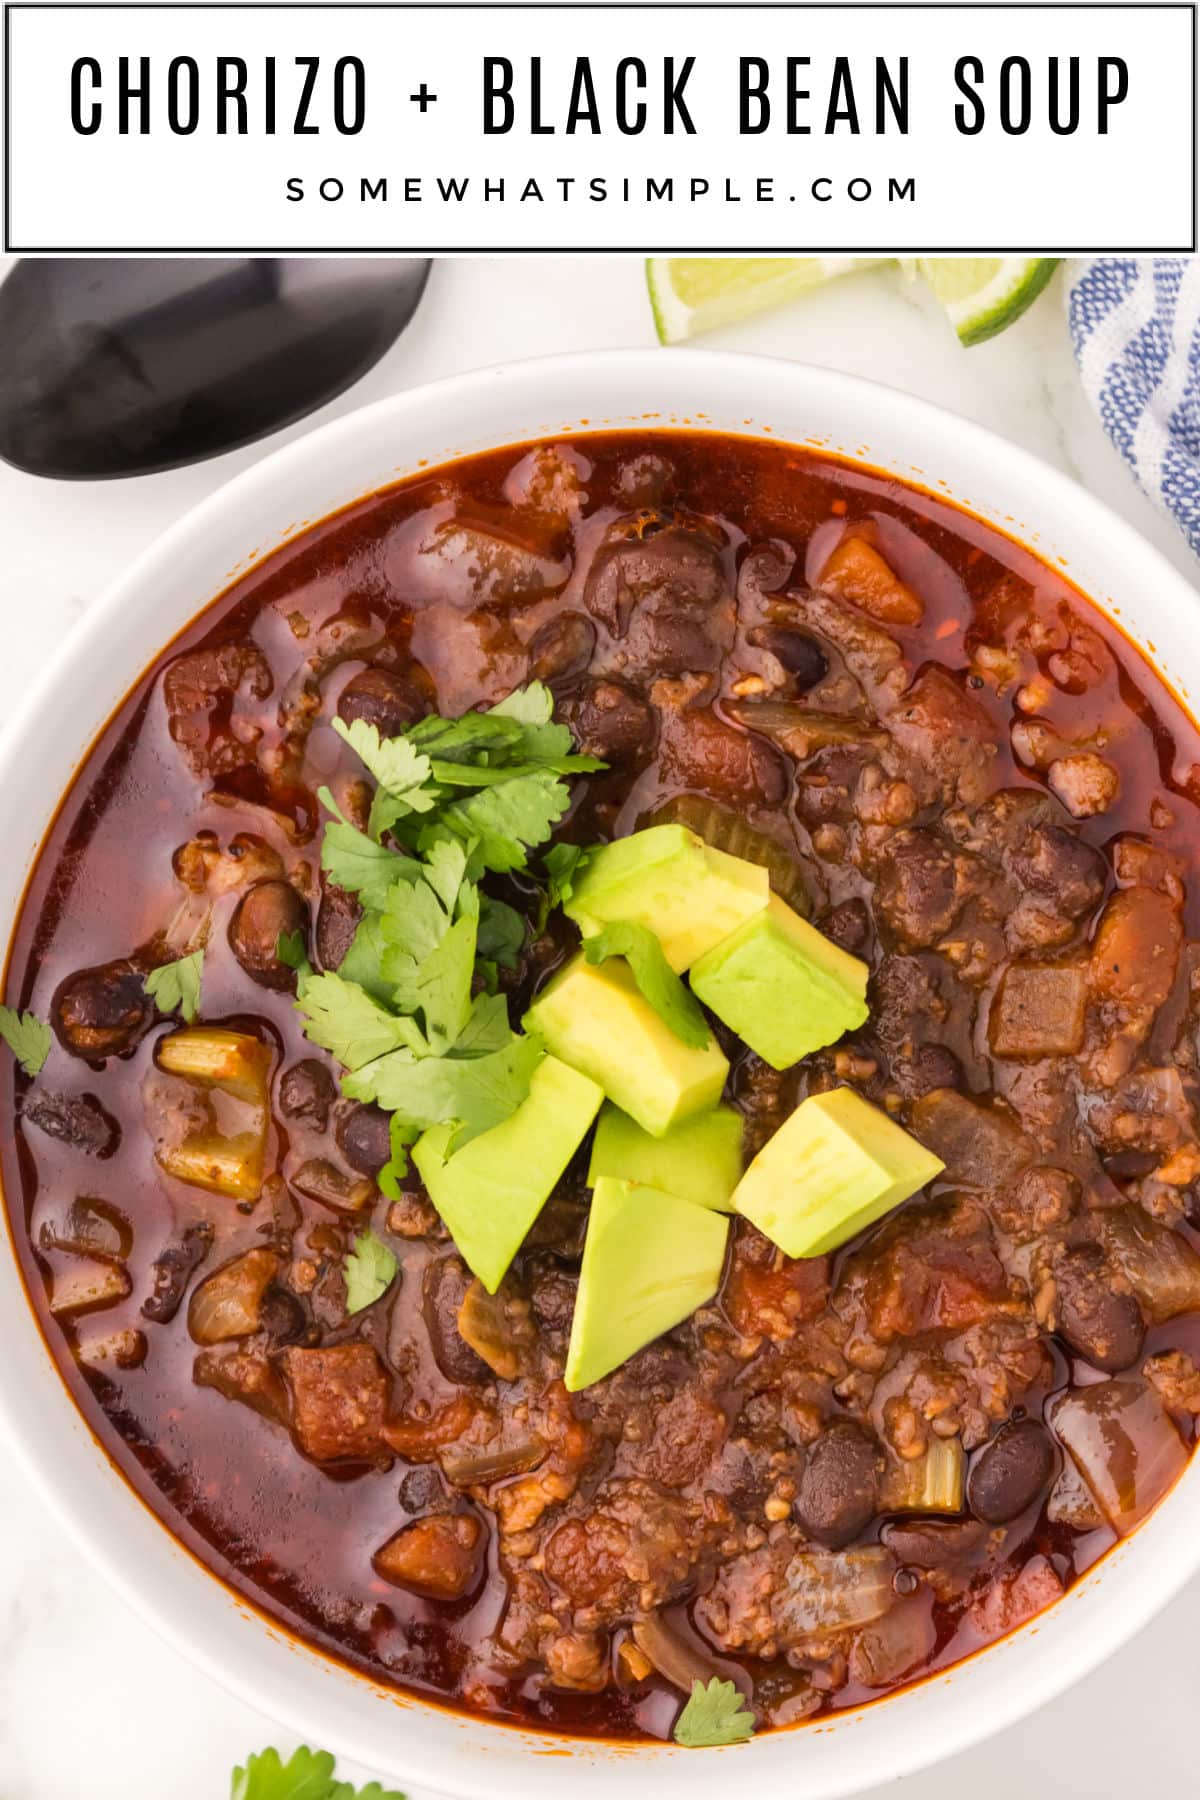 This delicious Chorizo and Black Bean Soup is packed full of flavor - the perfect comfort food for a cold winter's evening! via @somewhatsimple